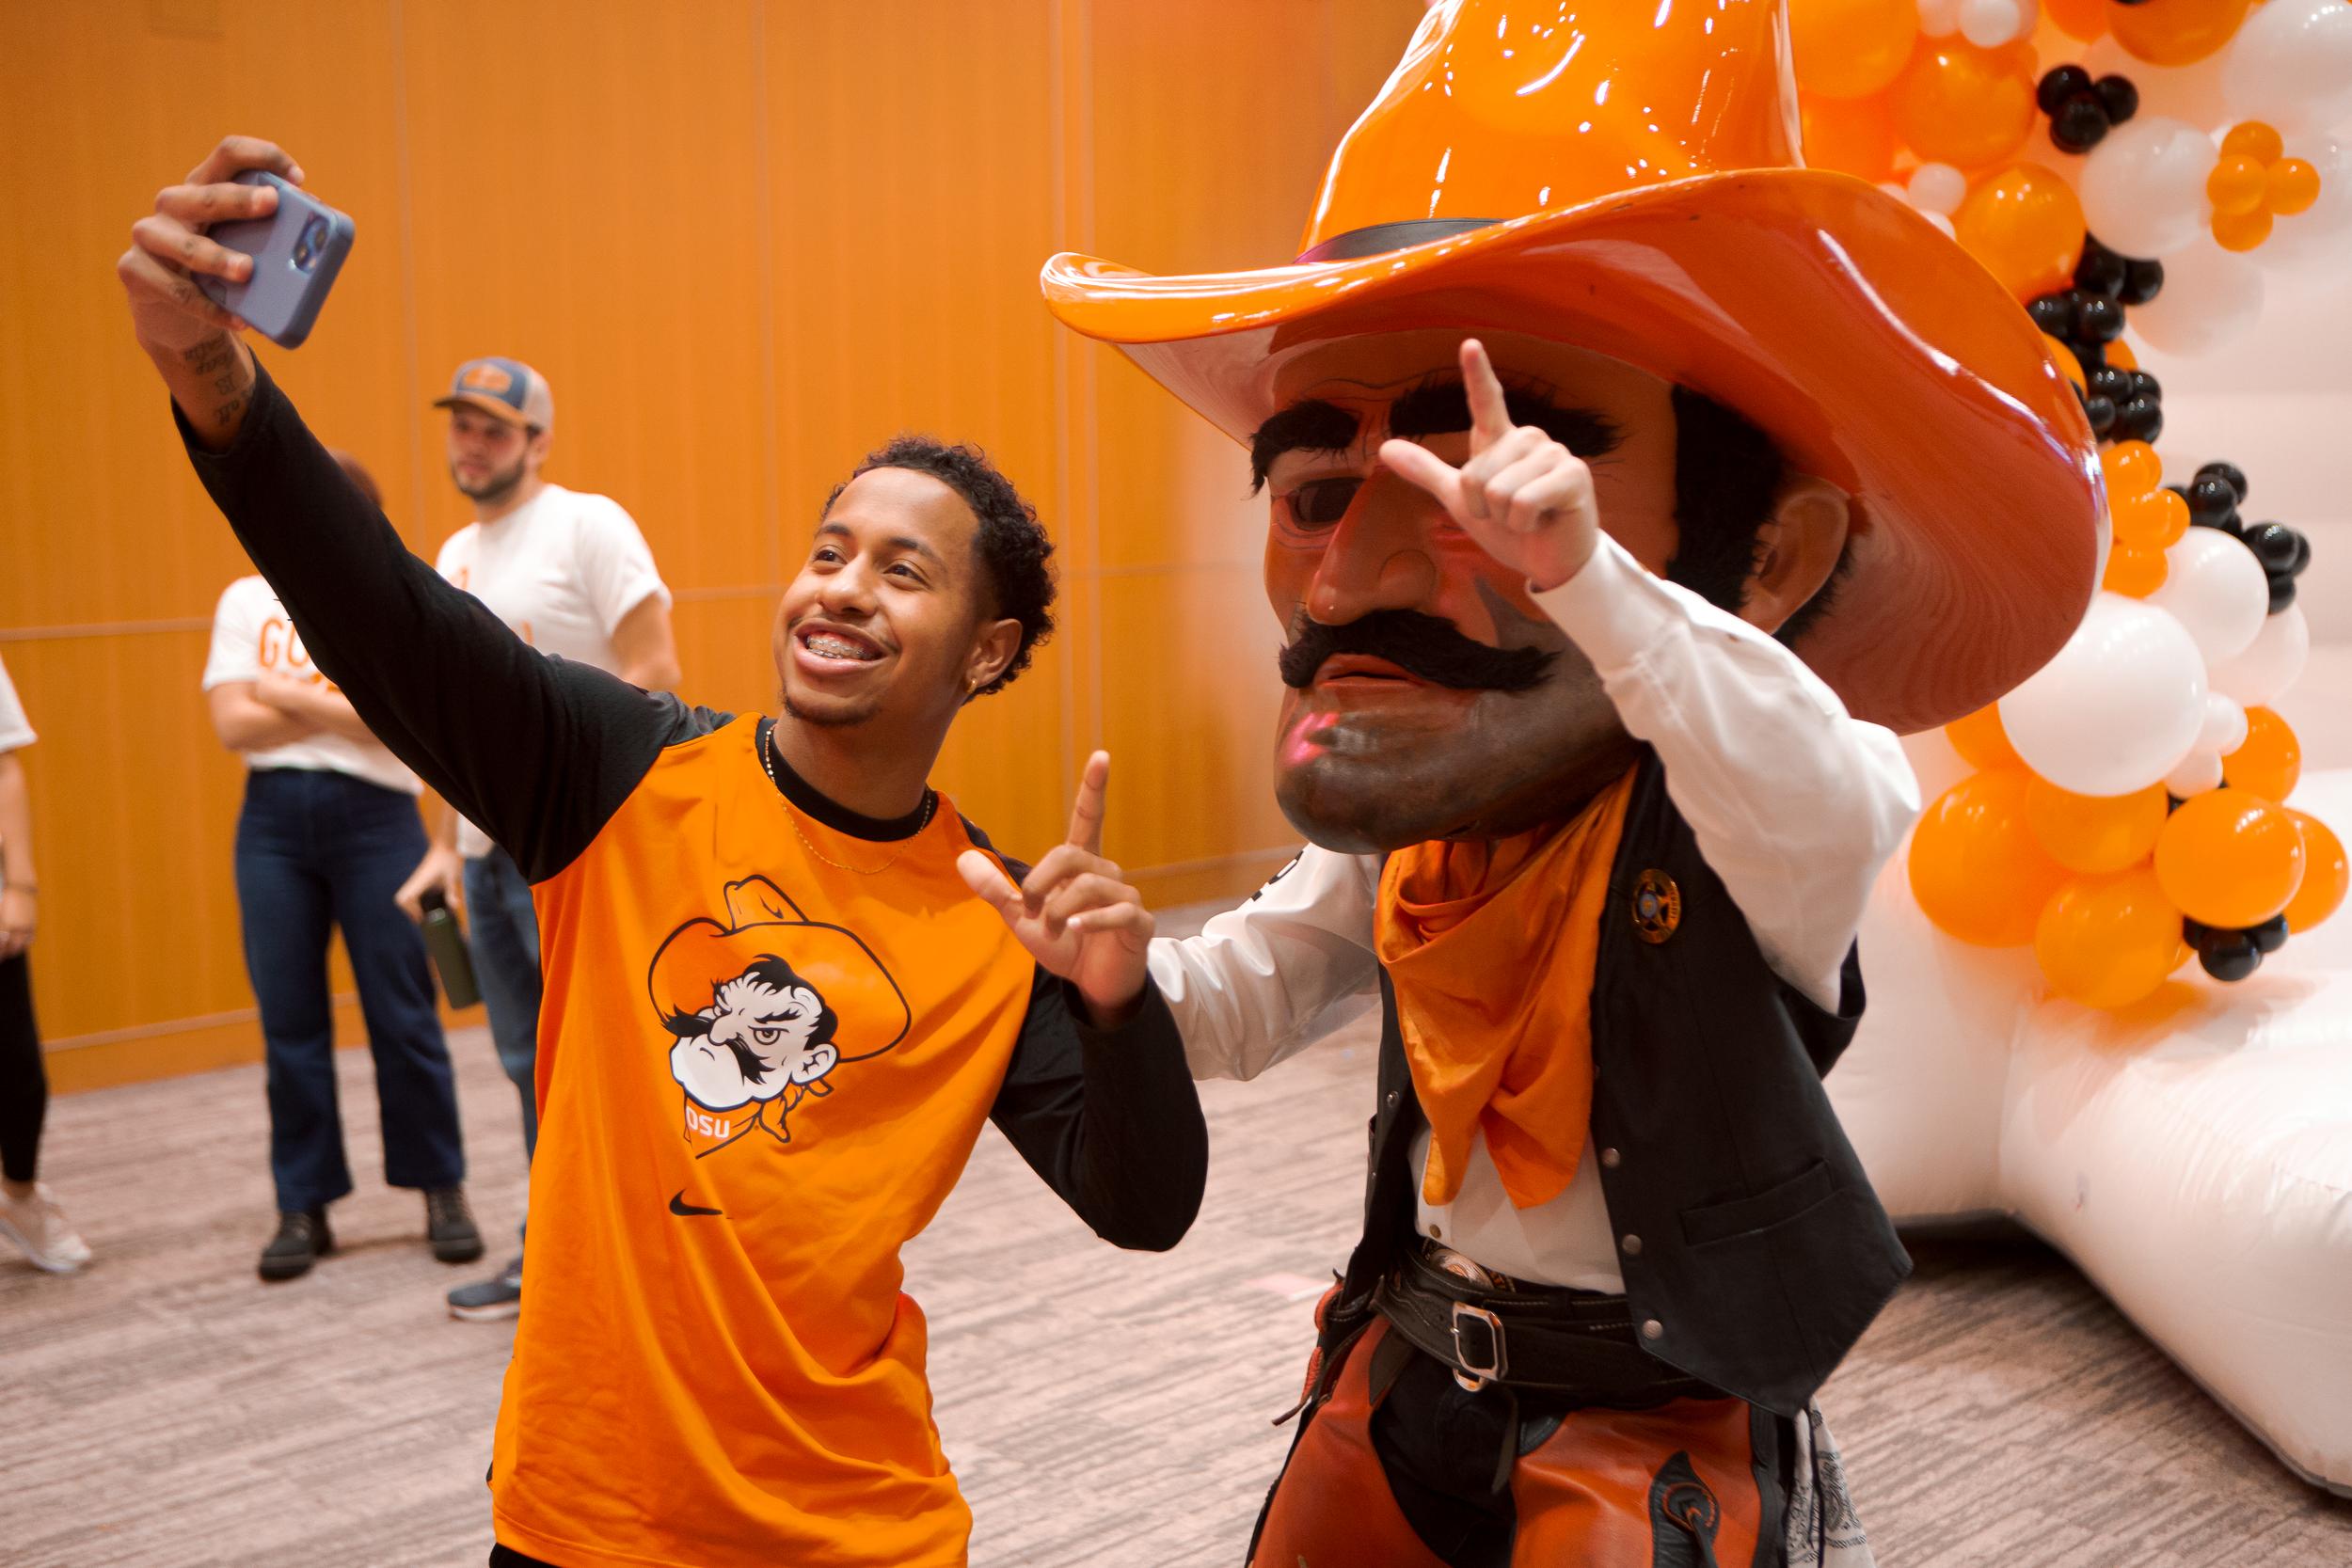 Pistol Pete taking a selfie with an the OSU Homecoming King